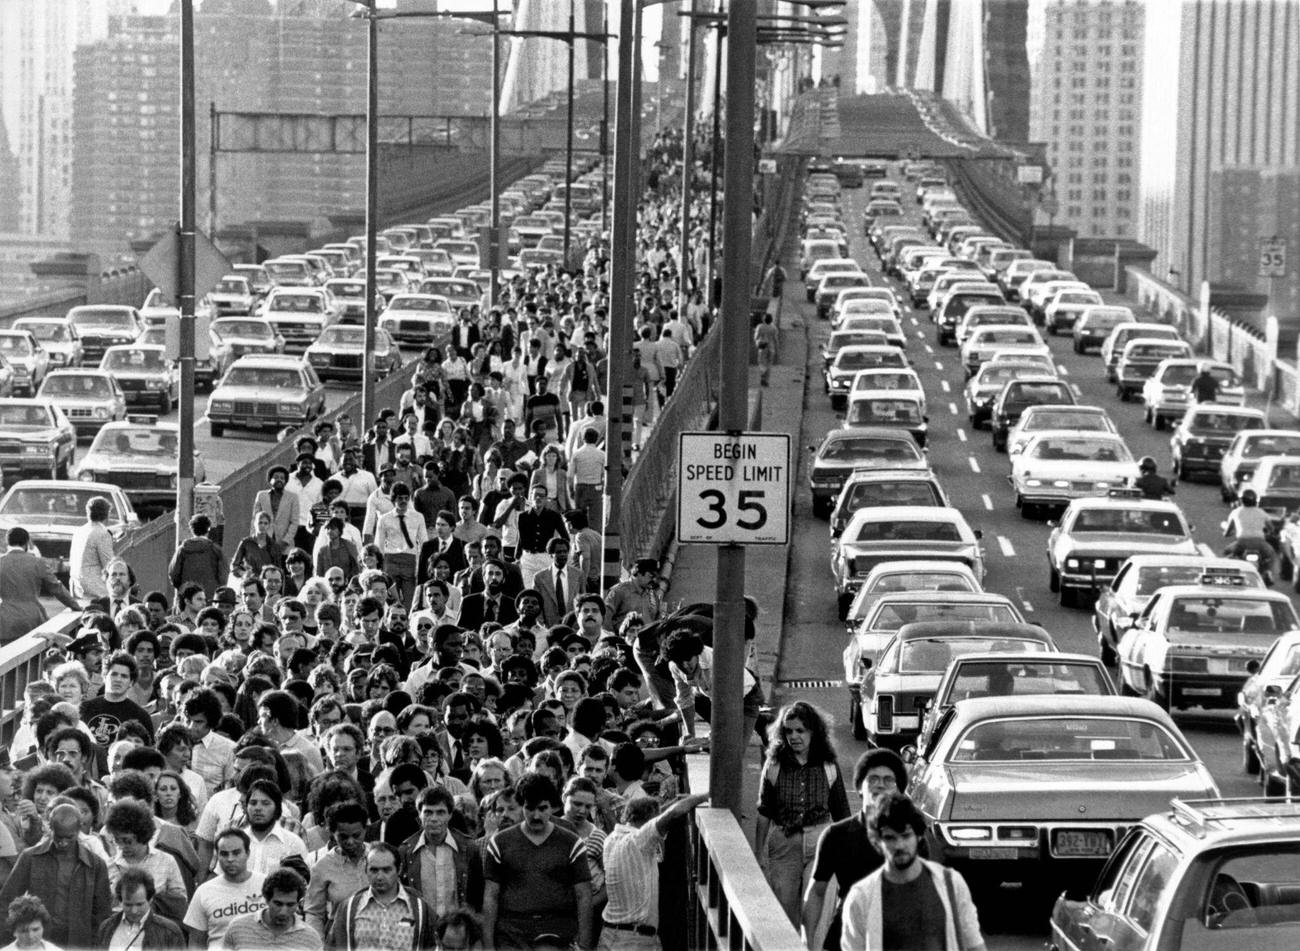 New Yorkers Jam The Brooklyn Bridge After A Power Outage Shuts Down The Subway System, Brooklyn, Late 1970S